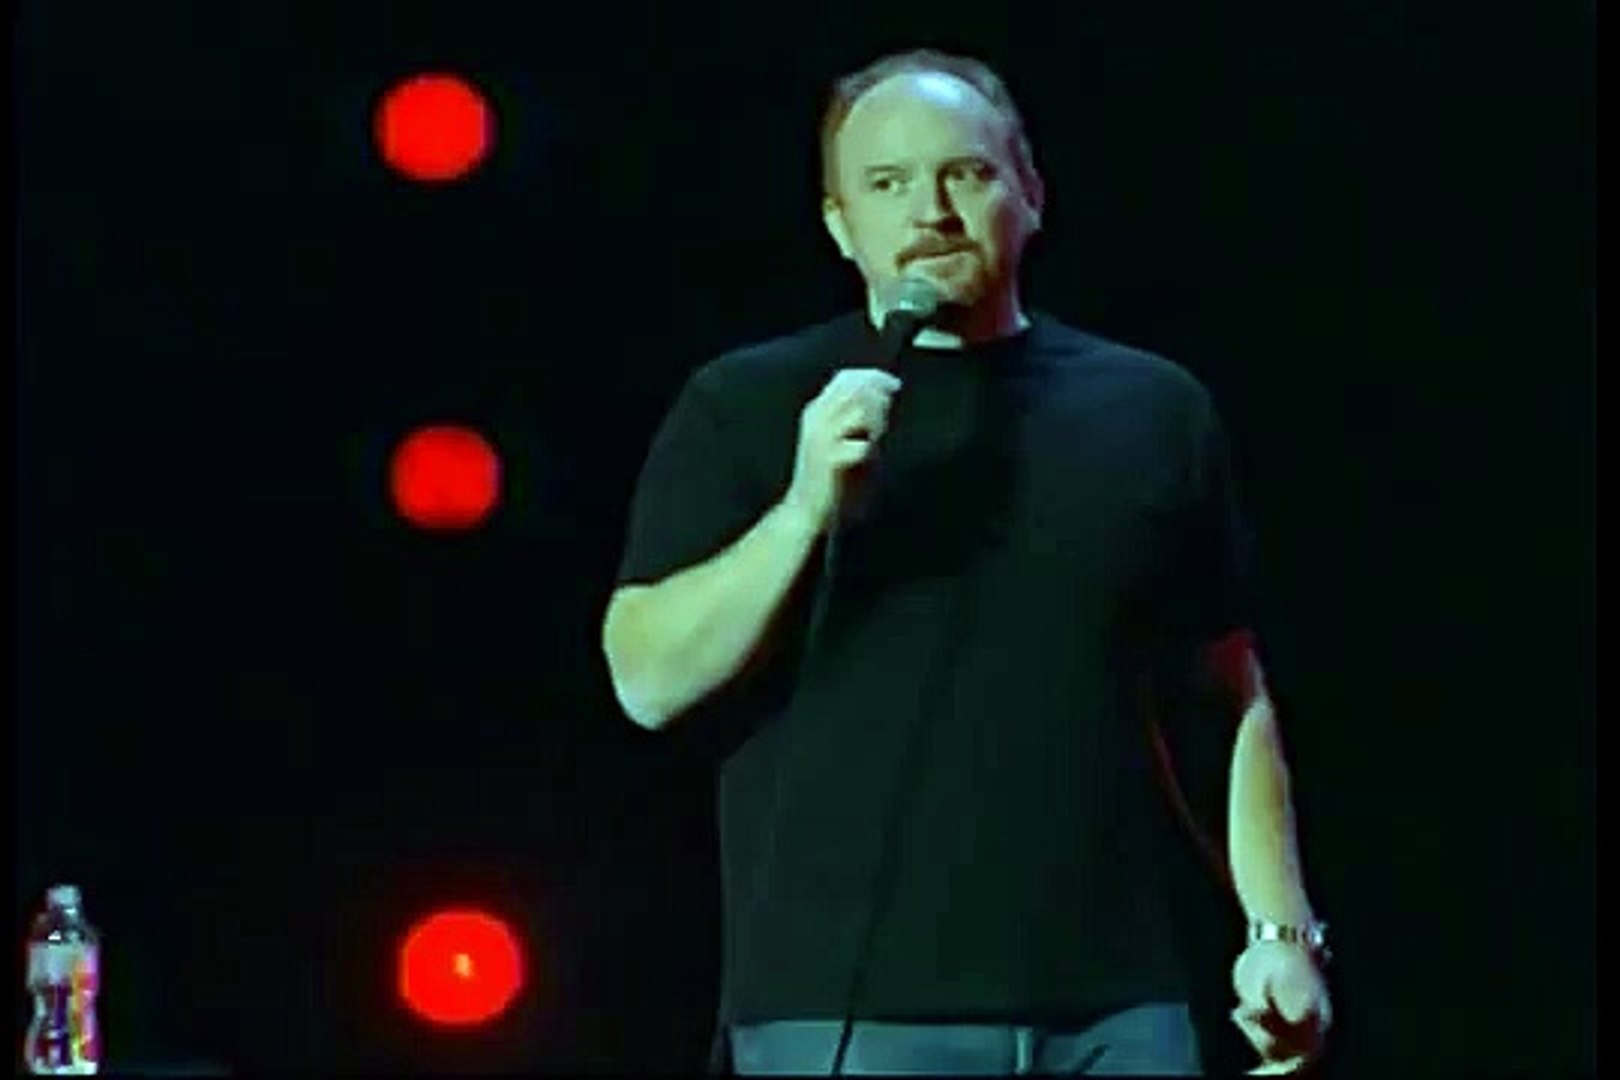 Louis C.K. : Chewed Up - Stand Up Comedy Full Show - video Dailymotion